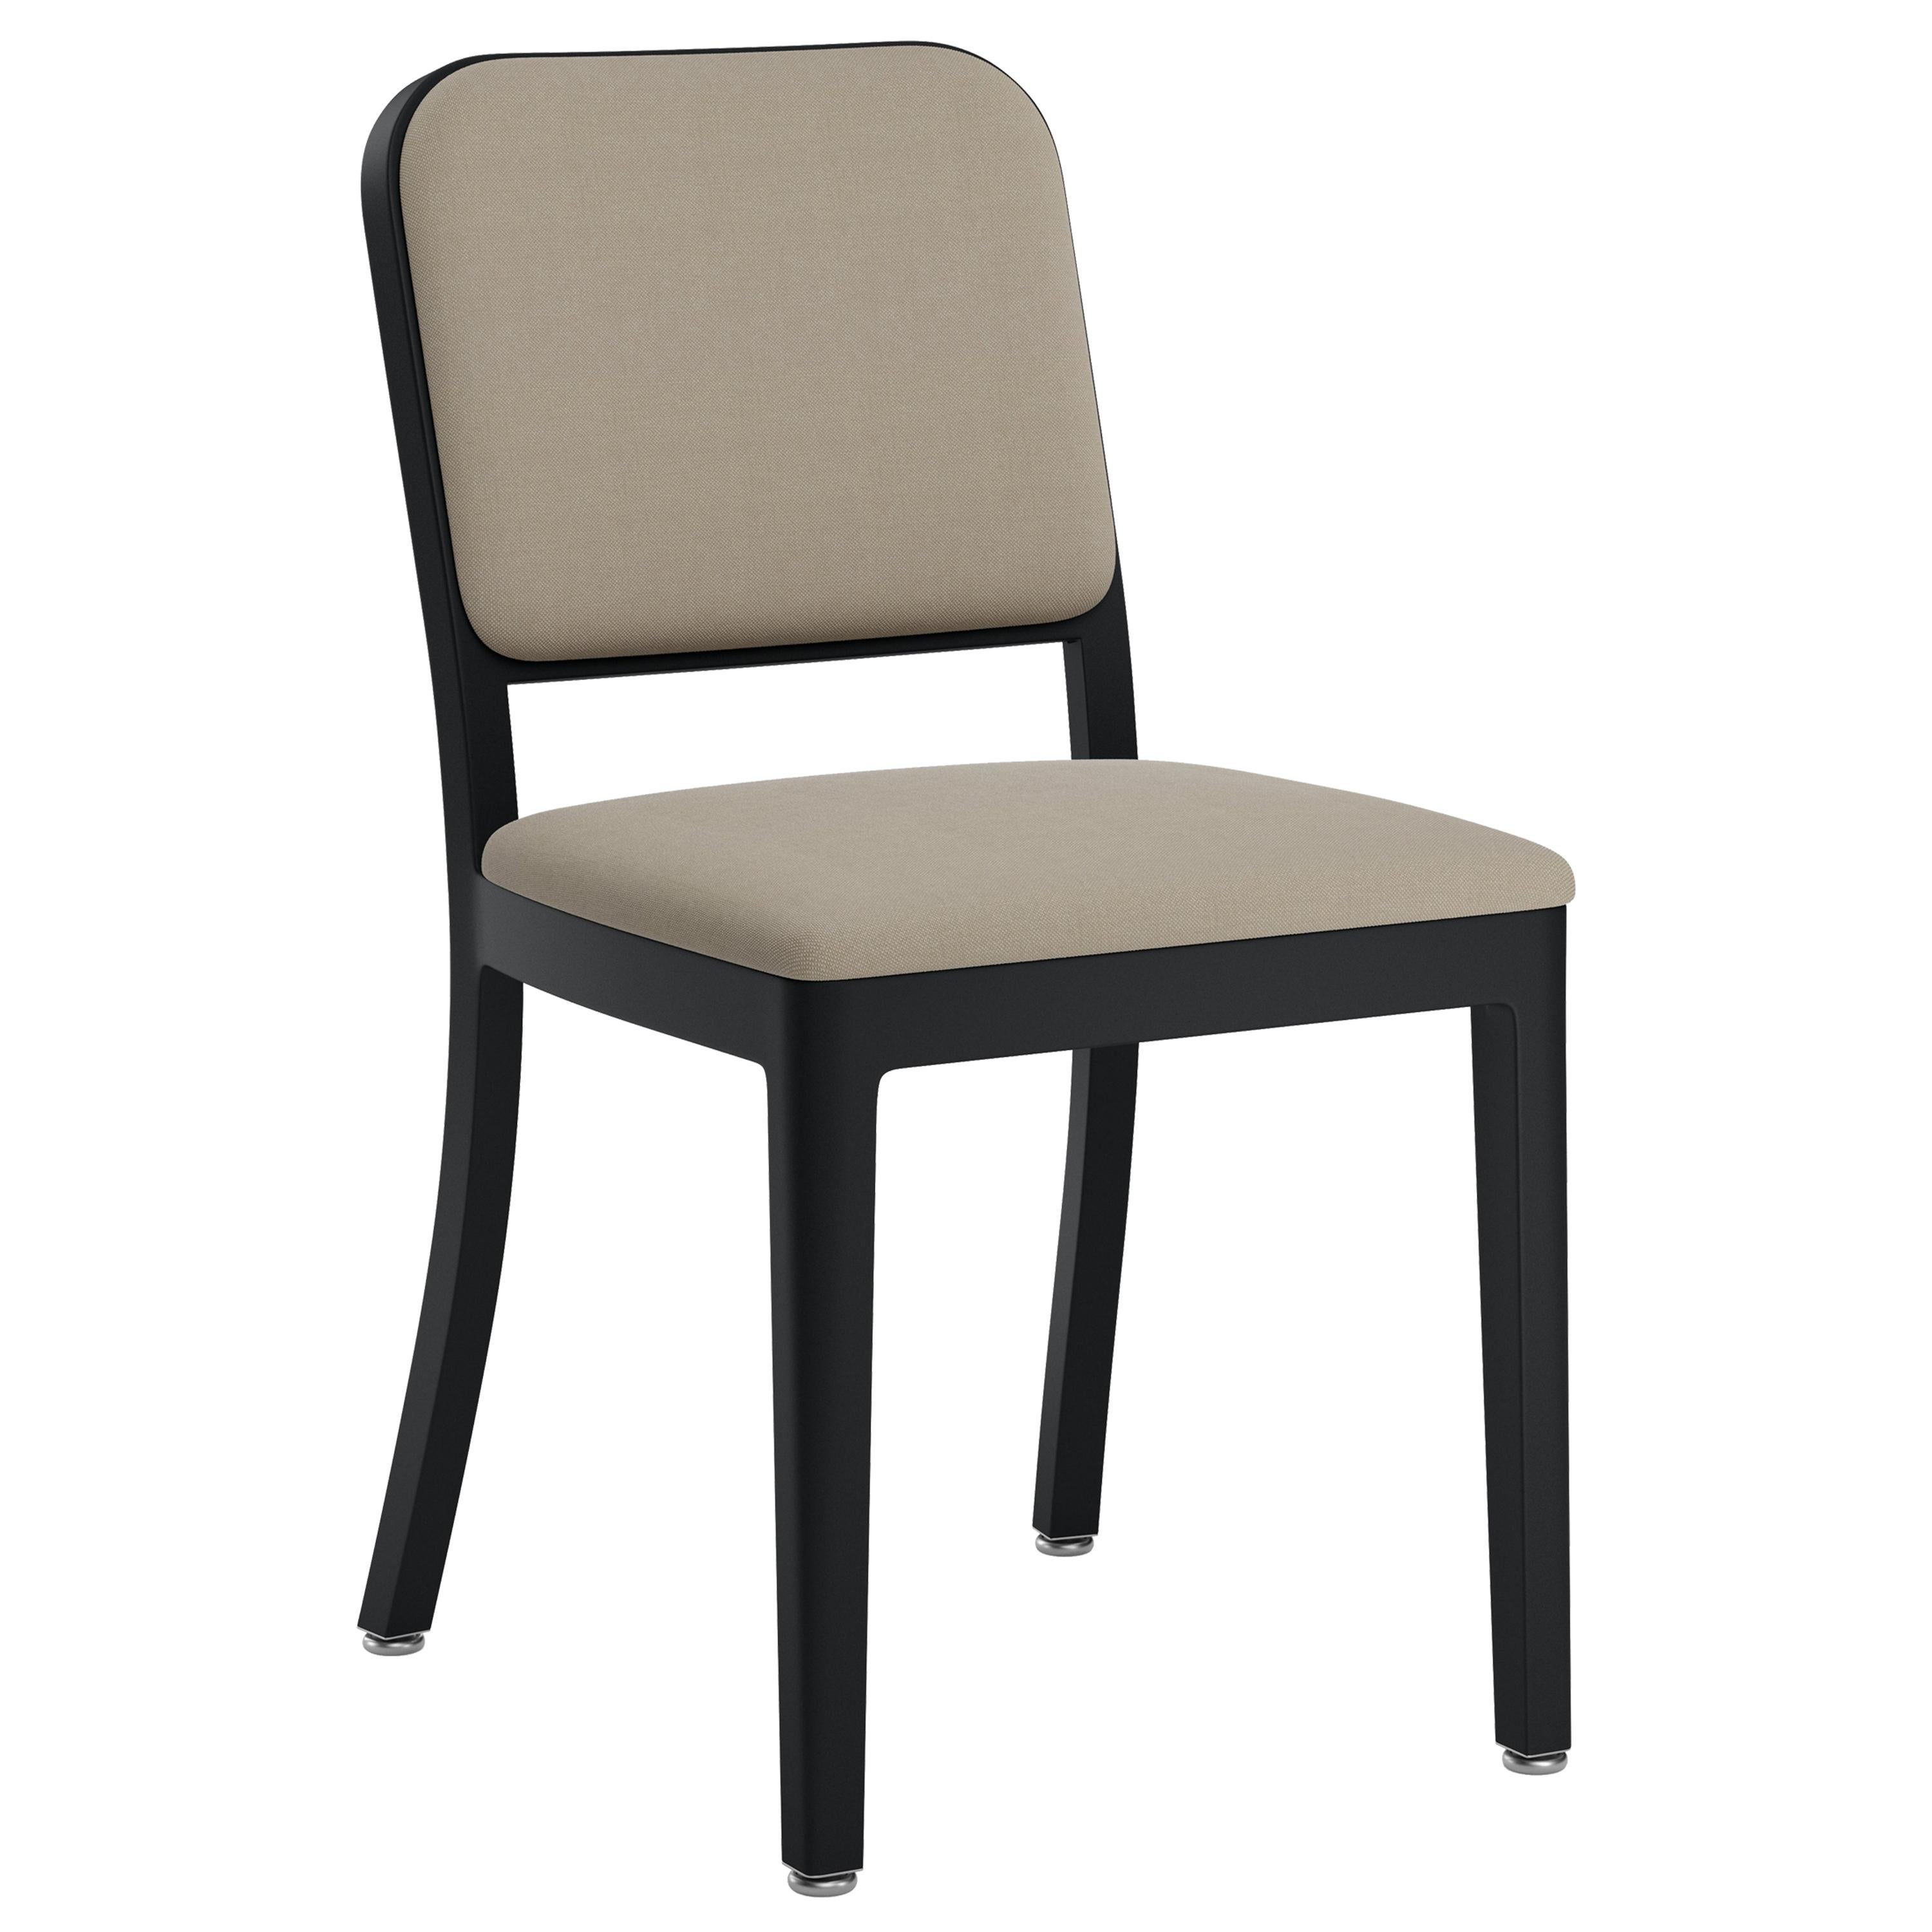 Emeco Navy Officer Side Chair in Beige Fabric with Black Powder Coated Frame